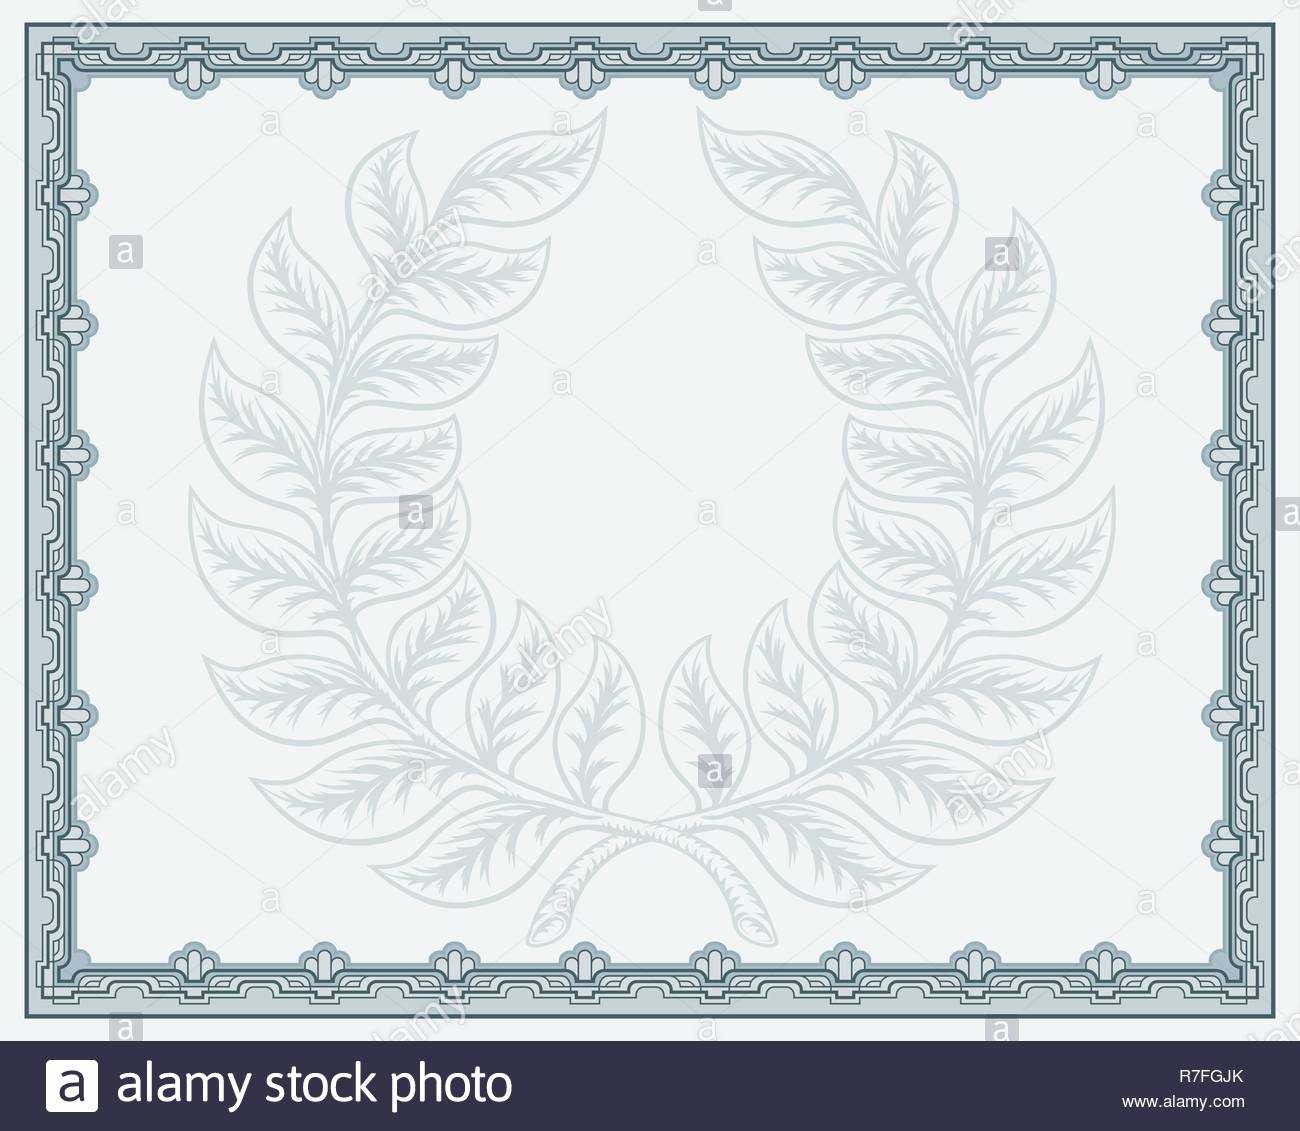 Certificate Template Diploma Background Stock Vector Art In Qualification Certificate Template